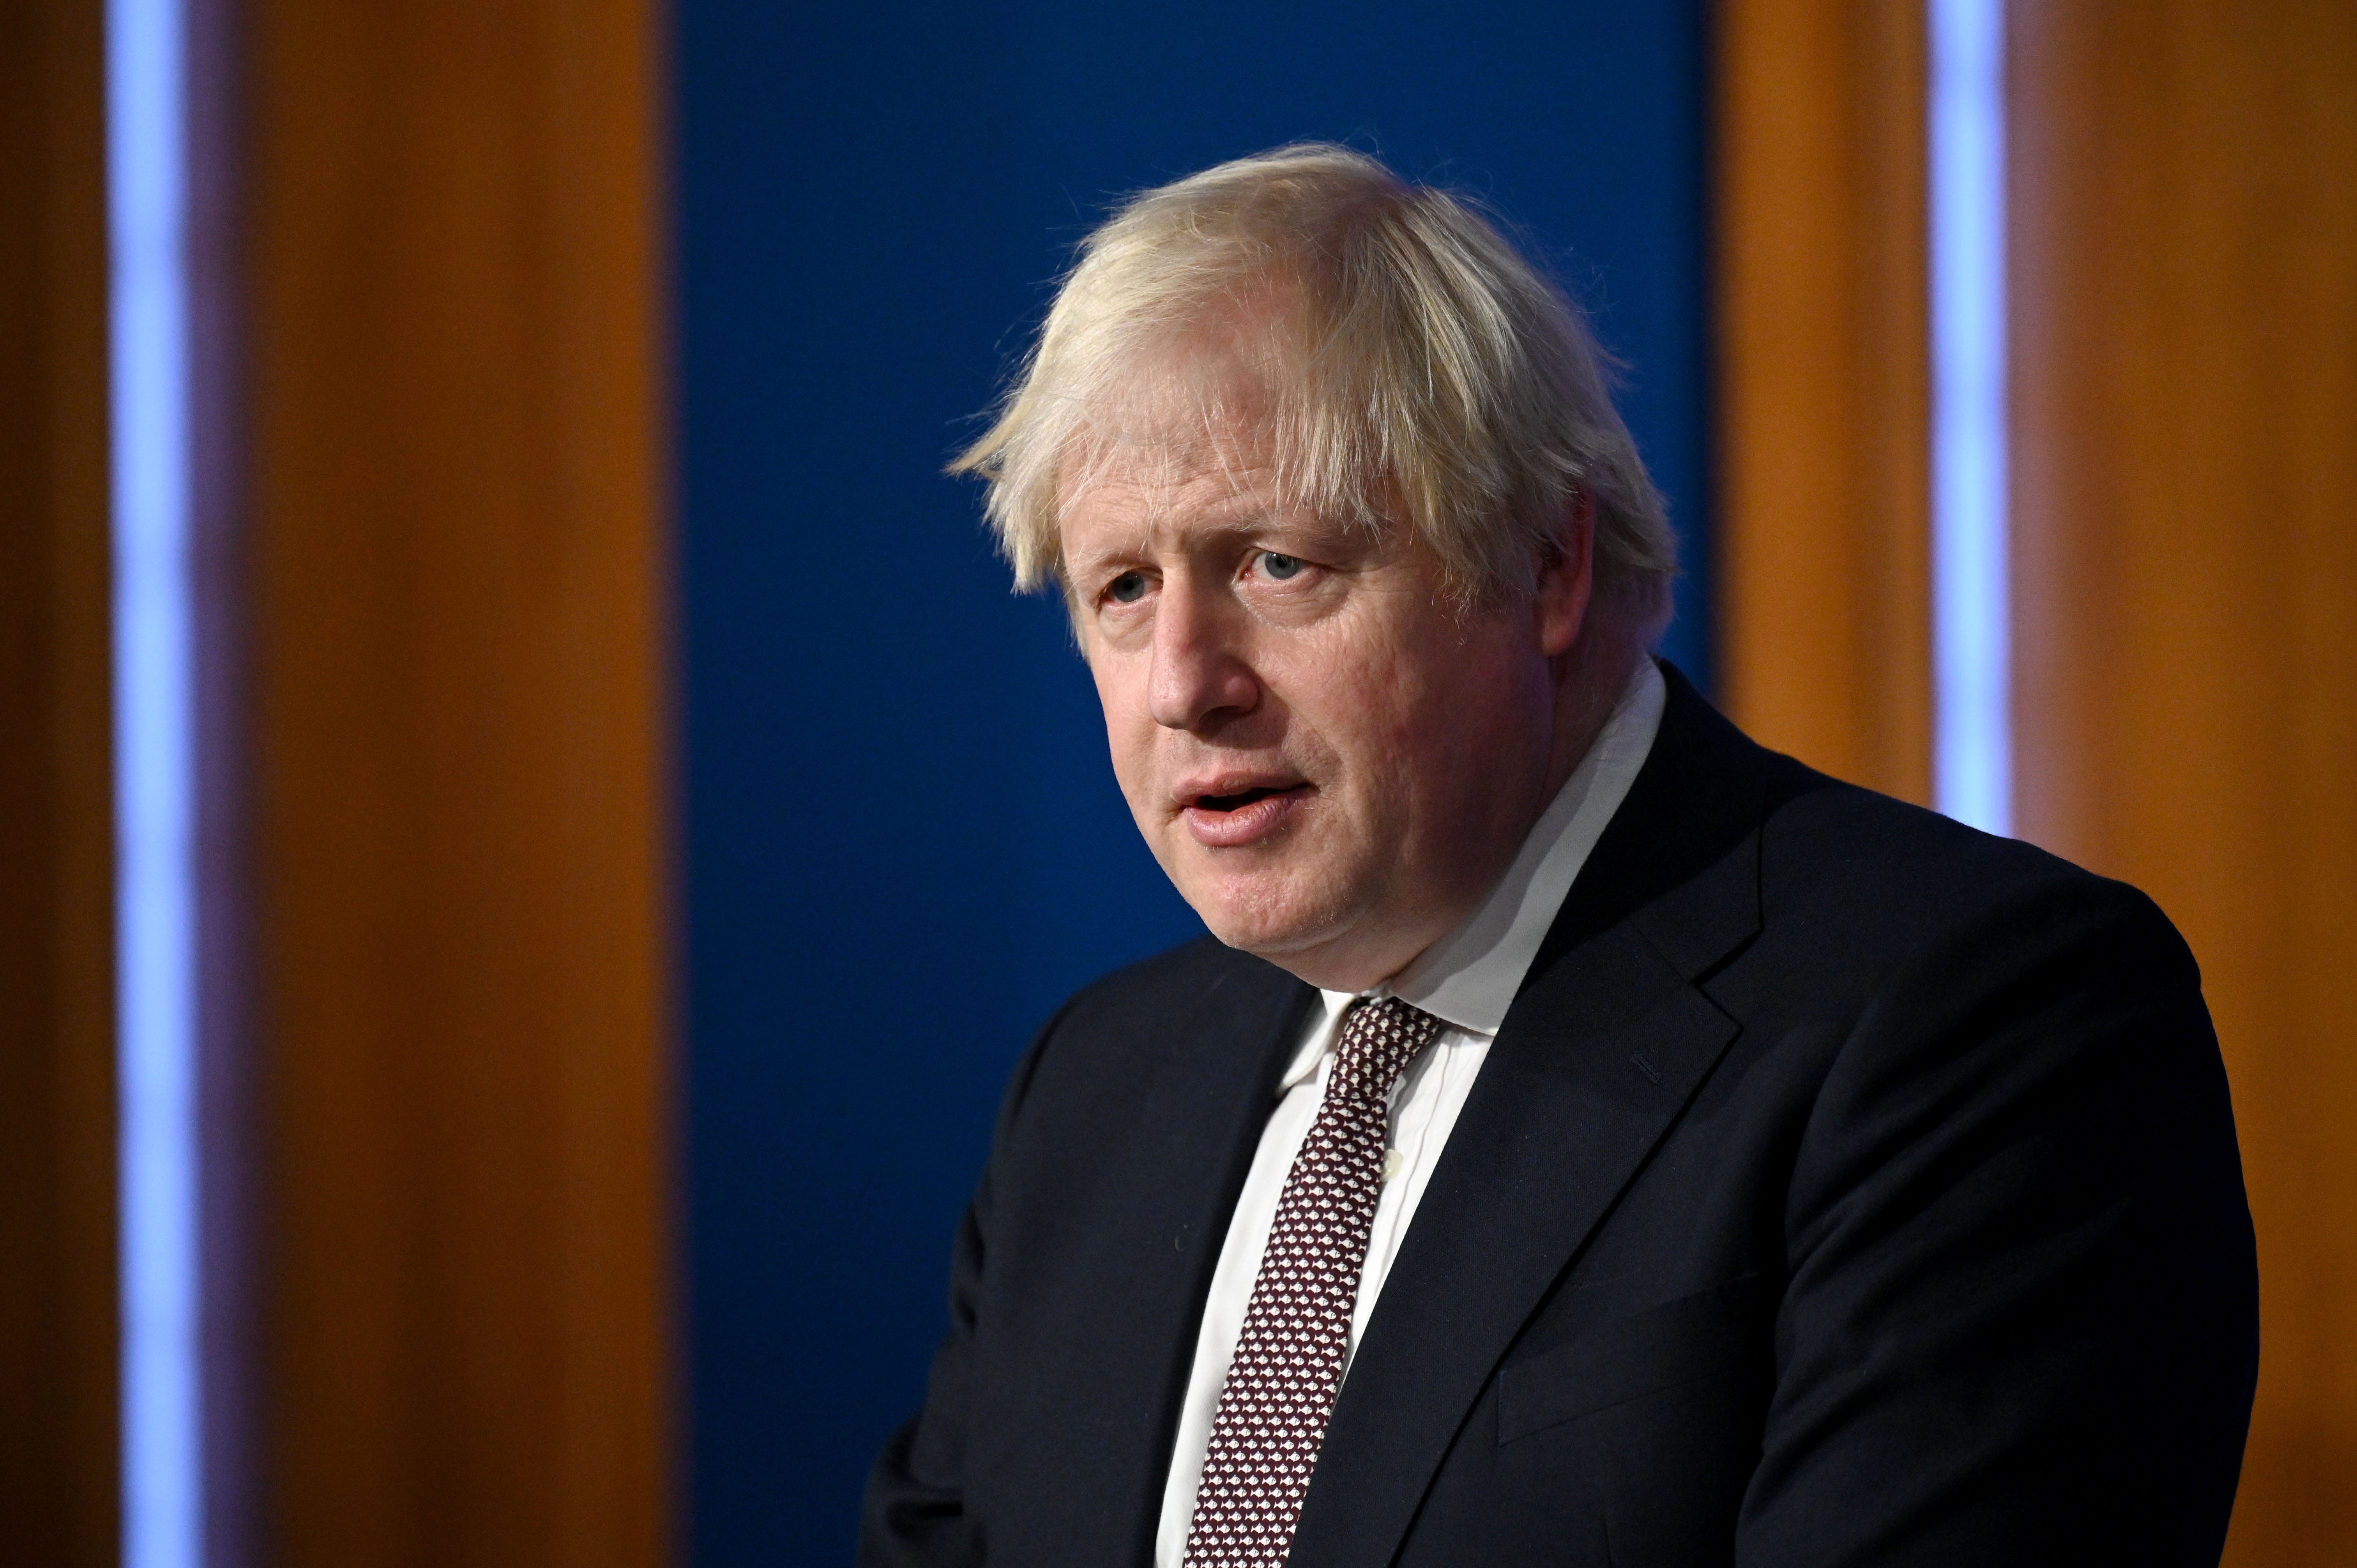 Boris Johnson has said lessons must learned from what happened (Leon Neal/PA)